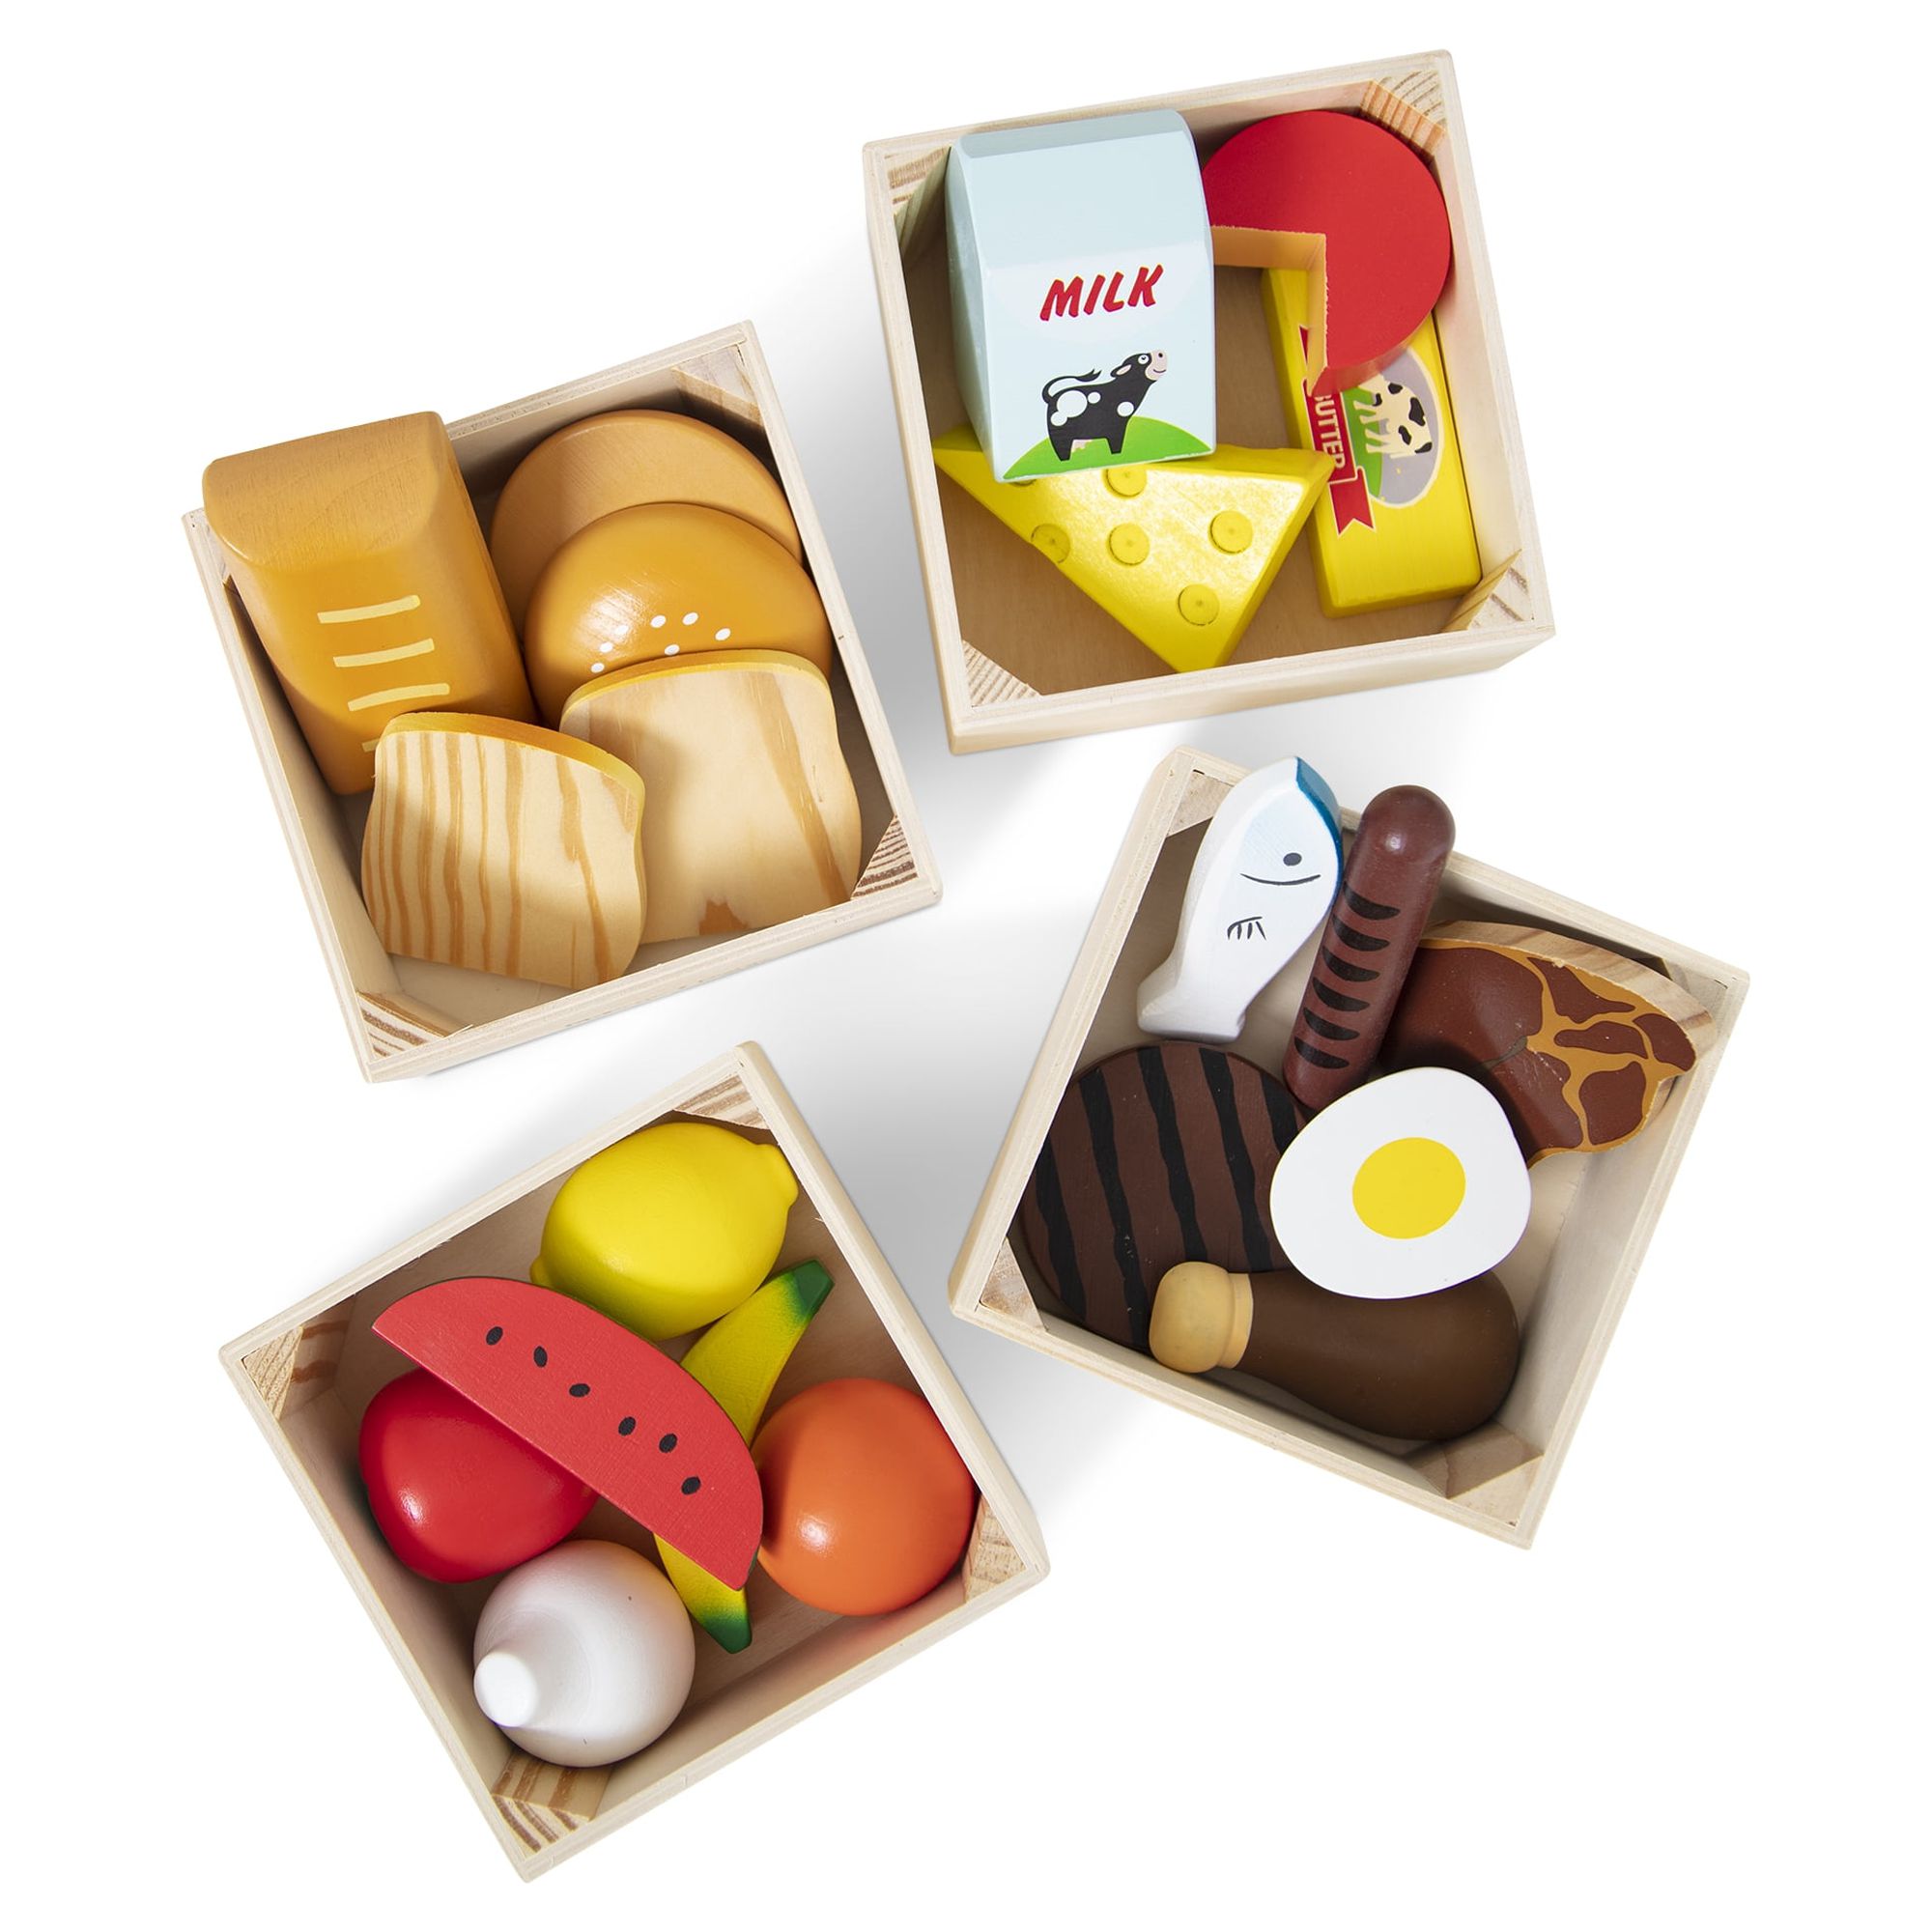 Melissa & Doug Food Groups - 21 Wooden Pieces and 4 Crates, Multi - image 1 of 10